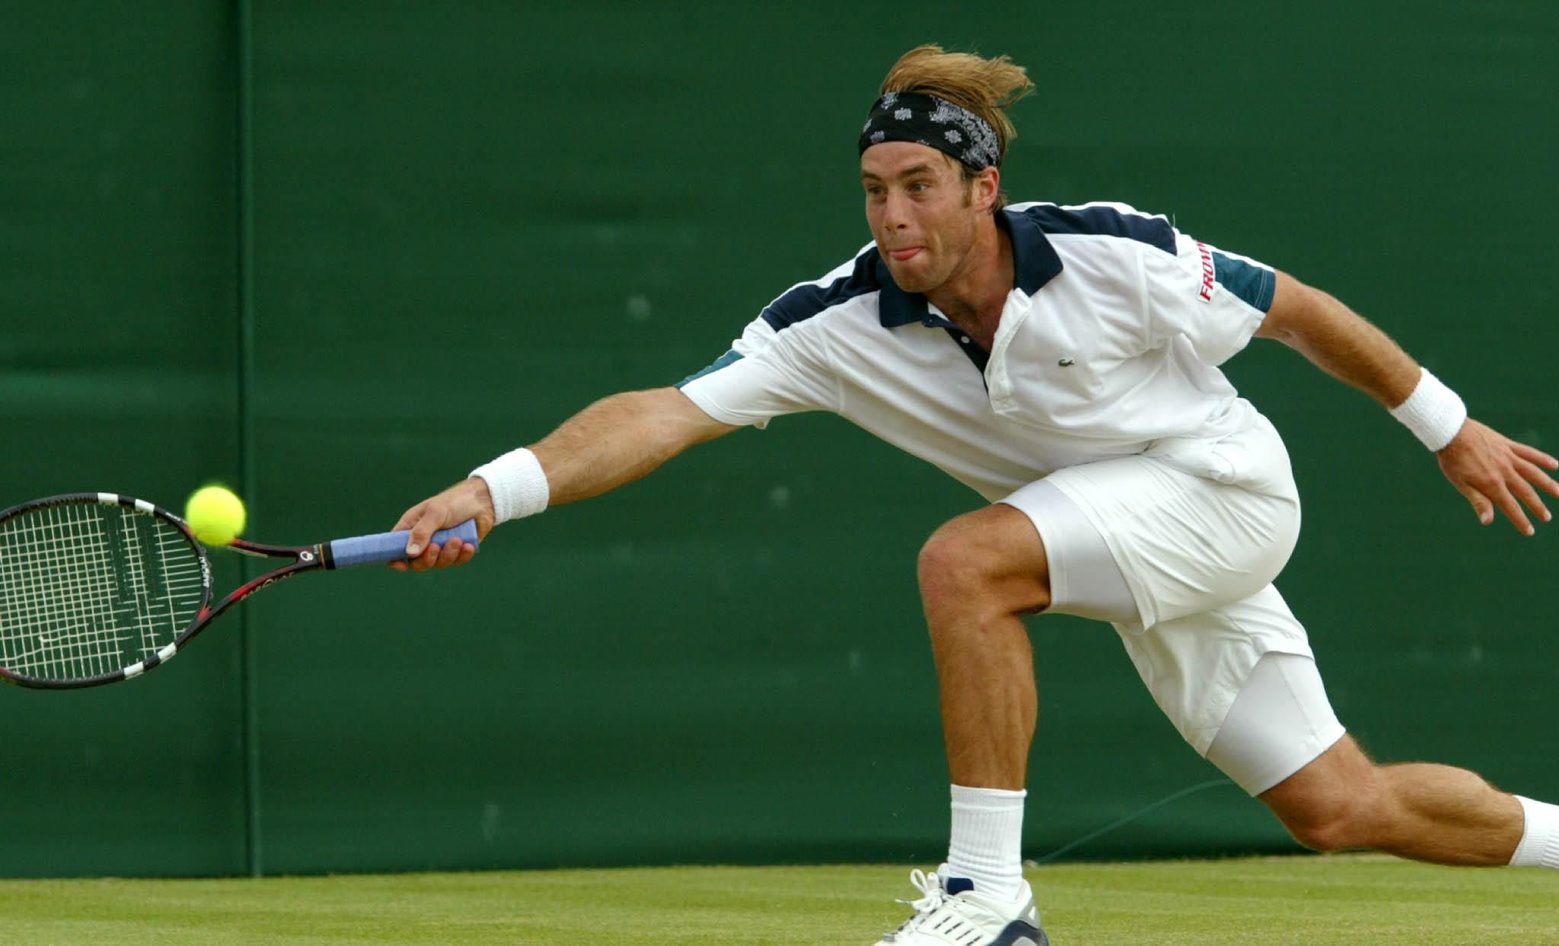 WIM102 - 20020628 - WIMBLEDON, UNITED KINGDOM : Swiss George Bastl plays a forehand during his third round match against David Nalbandian of Argentina at the Wimbledon Tennis Championships, 28 June 2002. Bastl, who defeated Pete Sampras in the second round, lost in straight sets today.
EPA PHOTO EPA SRDJAN SUKI gh TENNIS WIMBLEDON - GEORGE BASTL